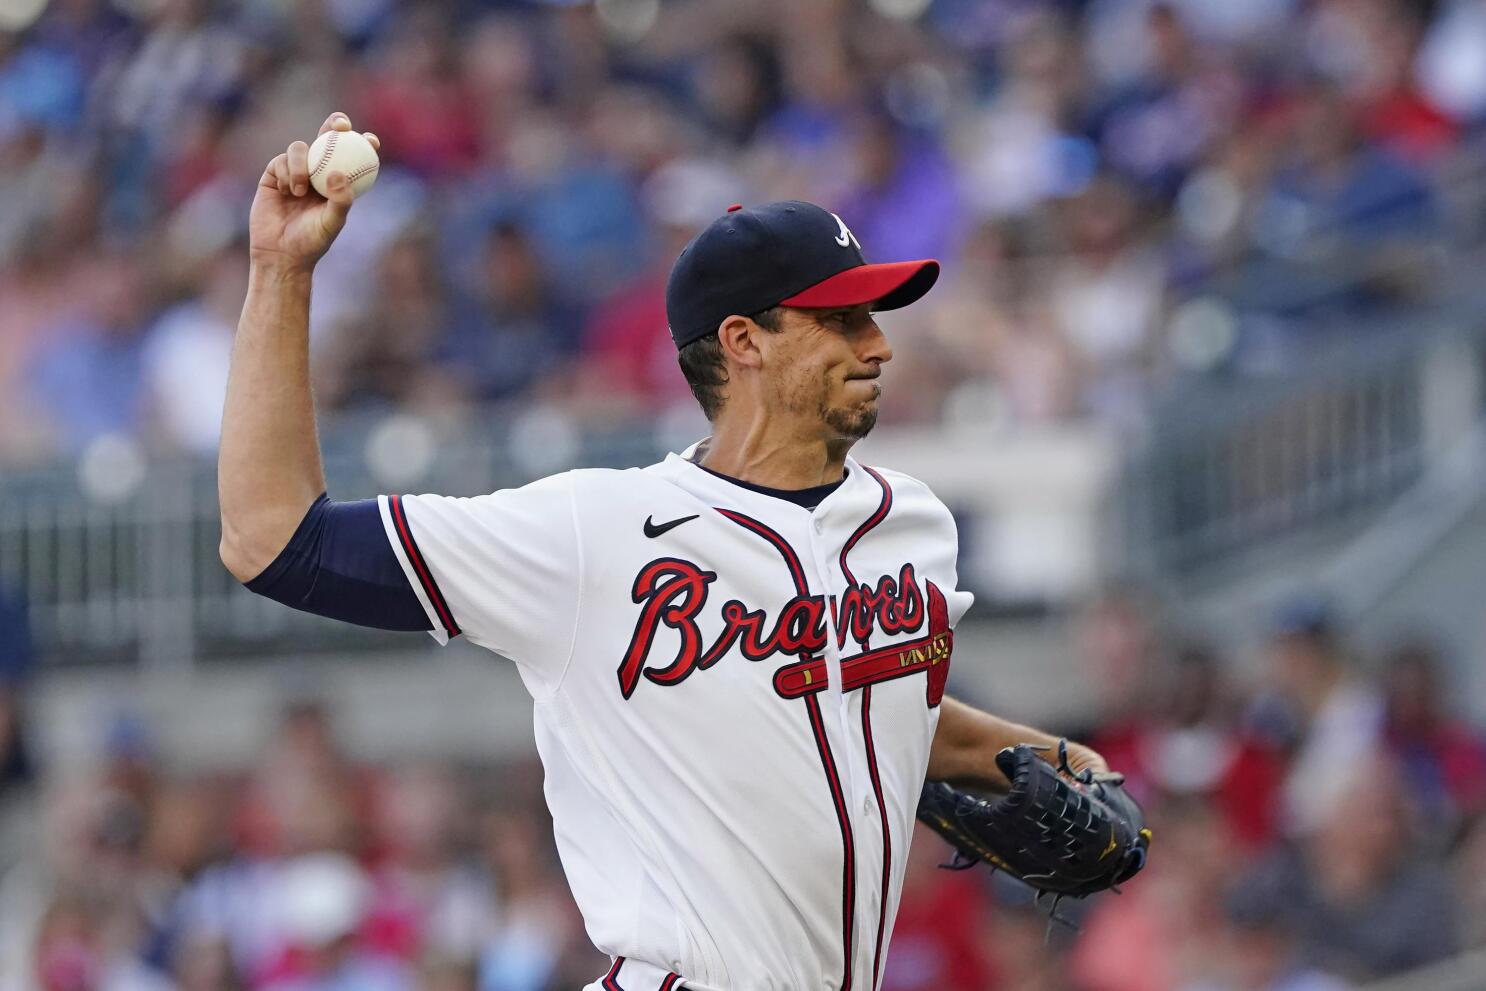 Morton takes no-hitter into 7th, Braves beat Cardinals 4-0